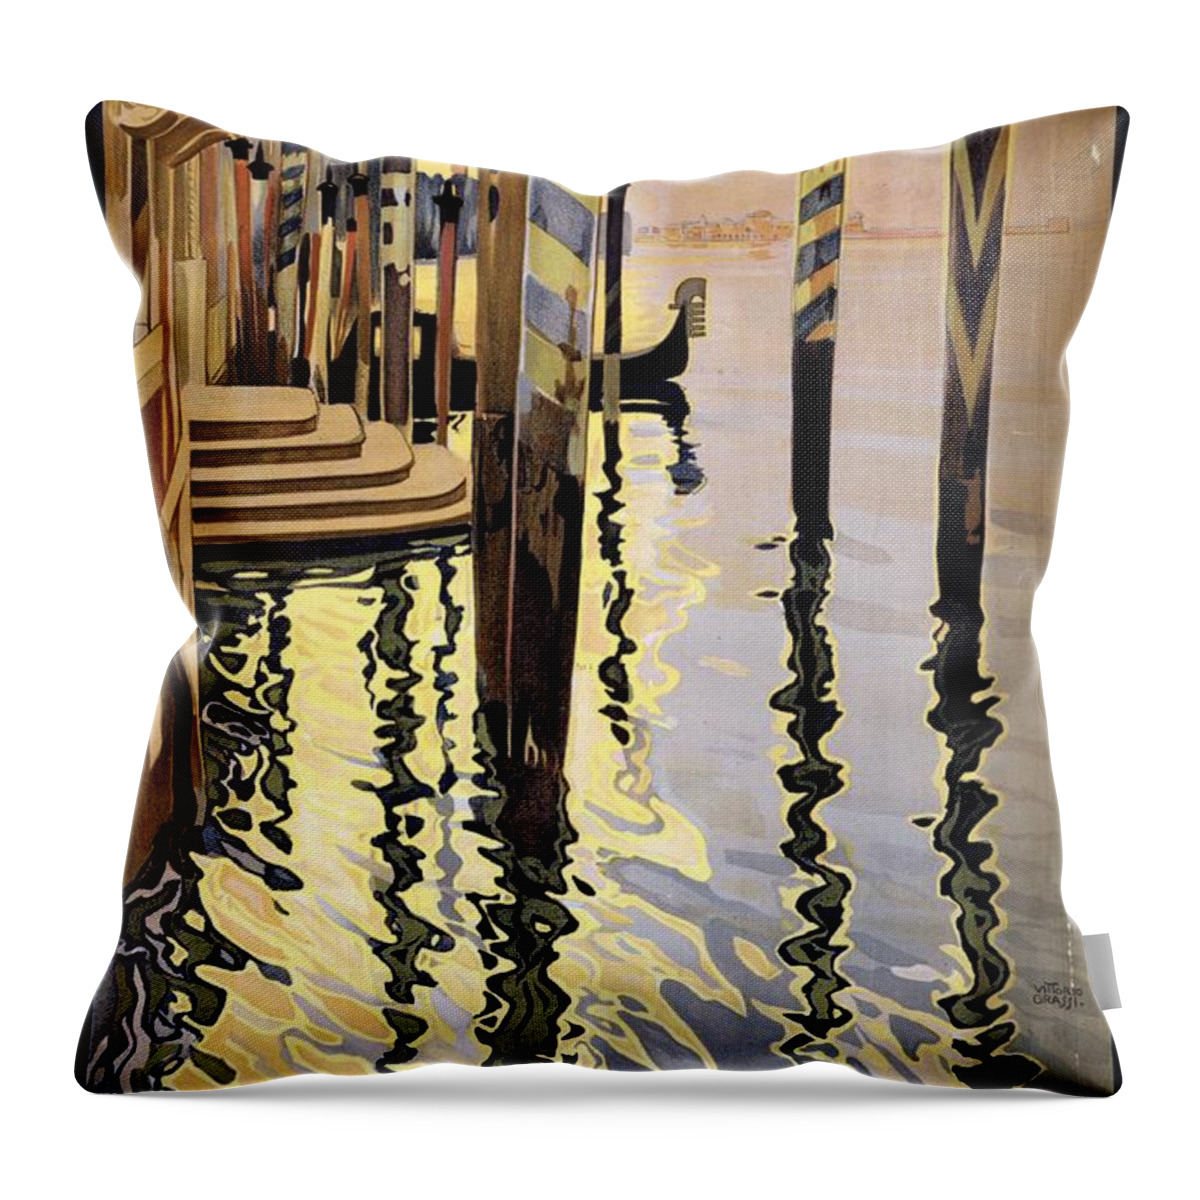 Venise Throw Pillow featuring the mixed media Venise Et Le Lido - Venice, Italy - Retro travel Poster - Vintage Poster by Studio Grafiikka